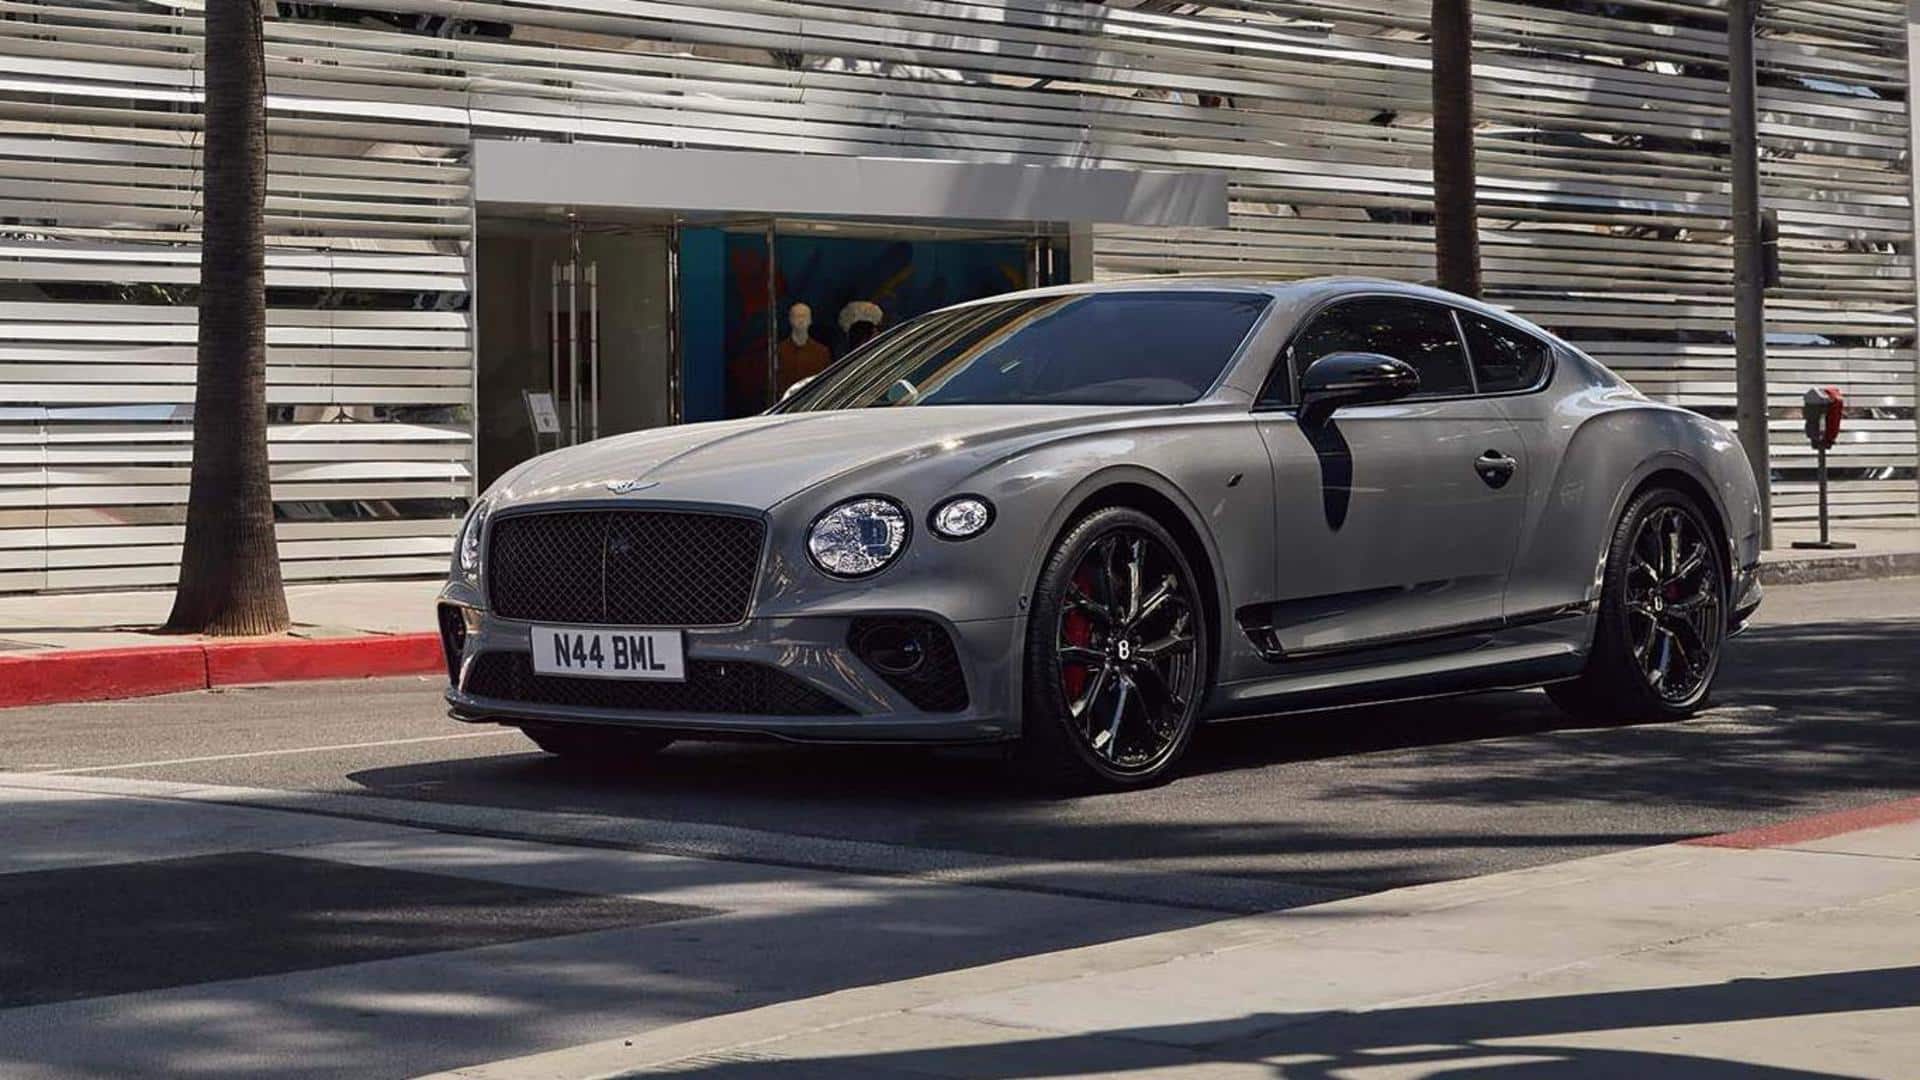 Bentley Continental GT (facelift) spotted testing: What to expect